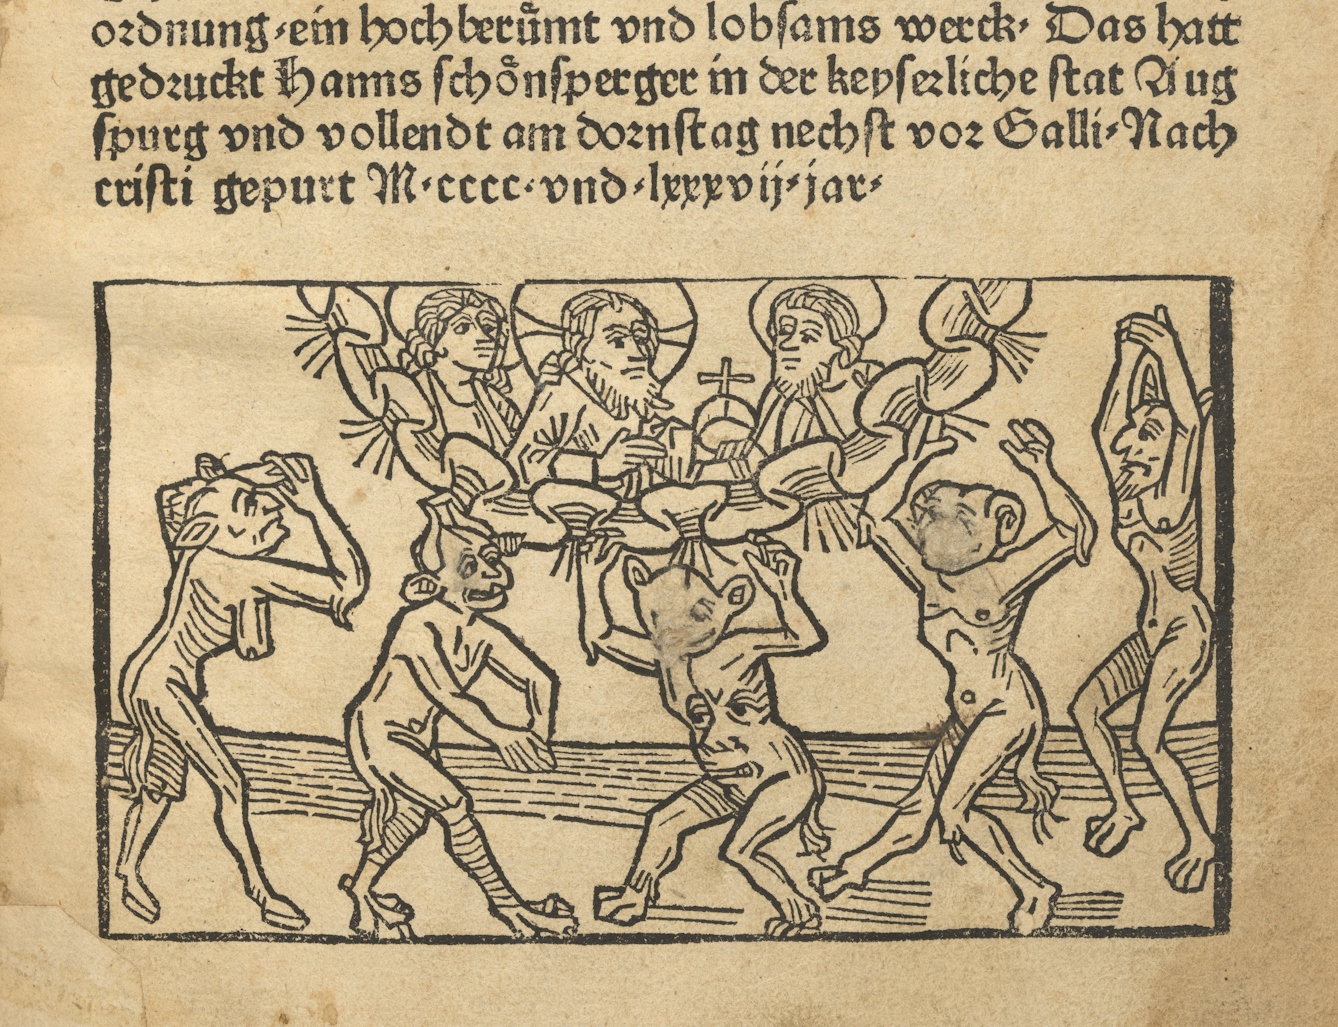 Photograph of a page from an early printed book where a previous owner has tried to rub out the faces of some of the demons.